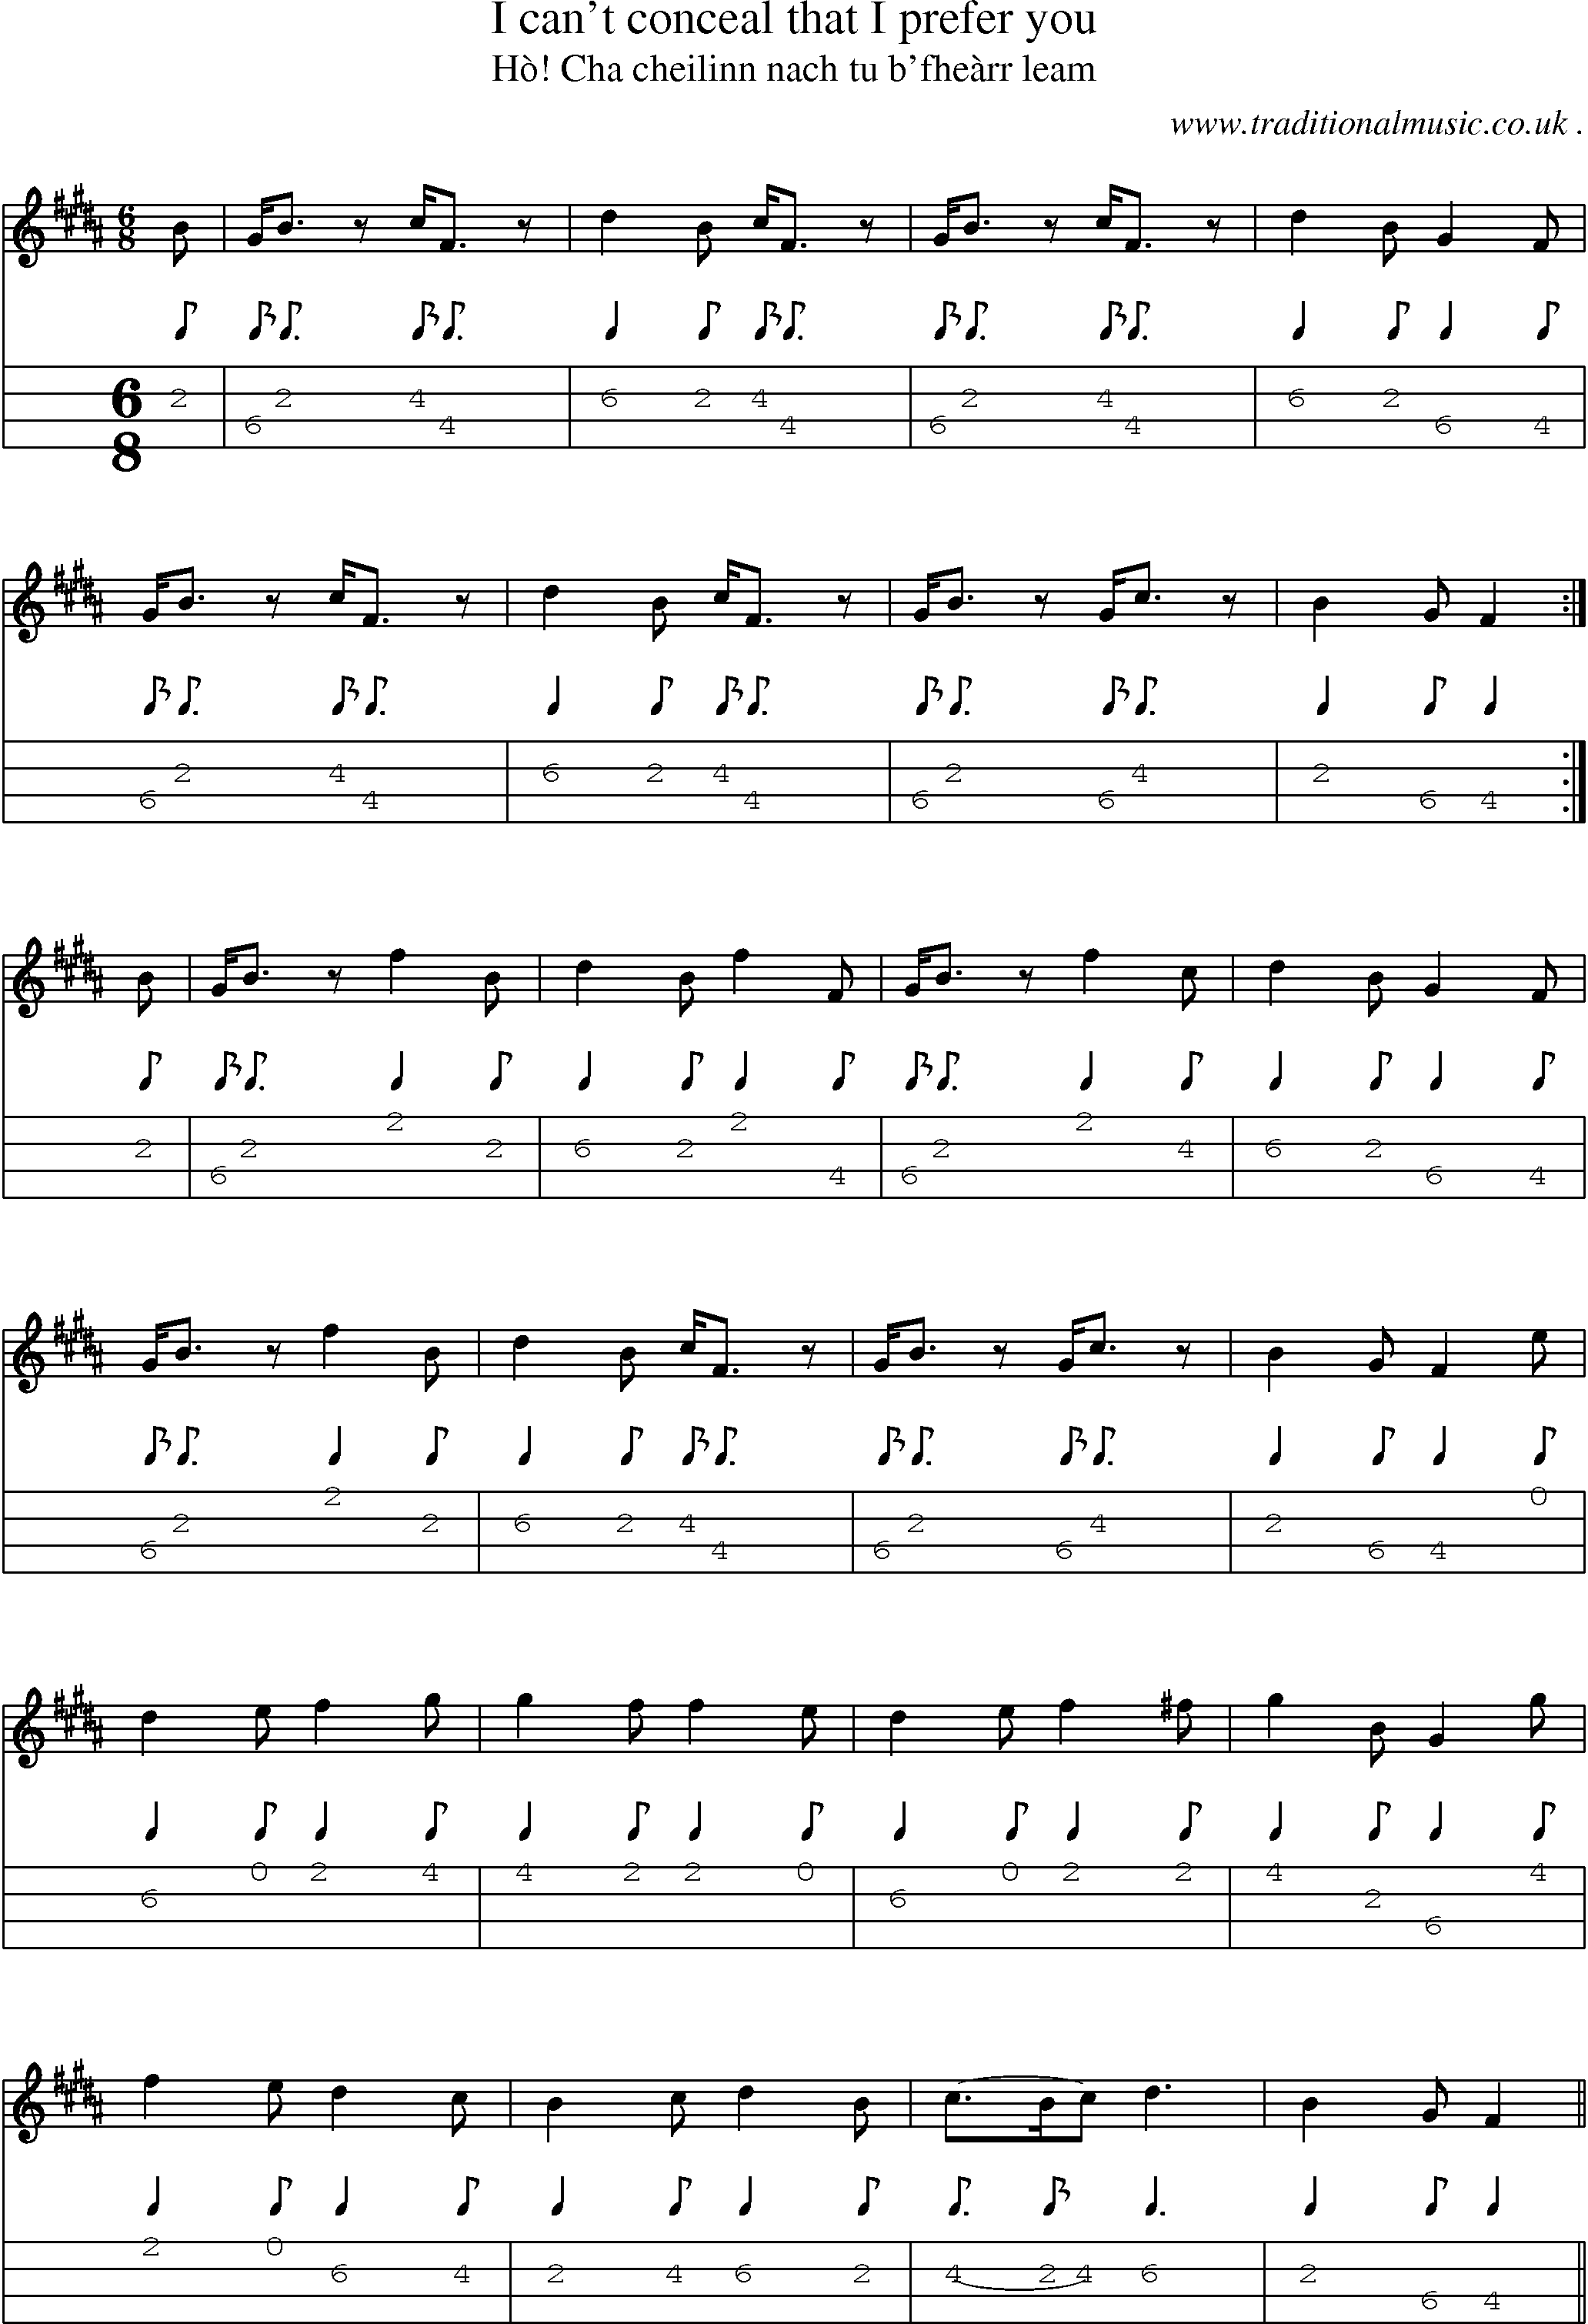 Sheet-music  score, Chords and Mandolin Tabs for I Cant Conceal That I Prefer You